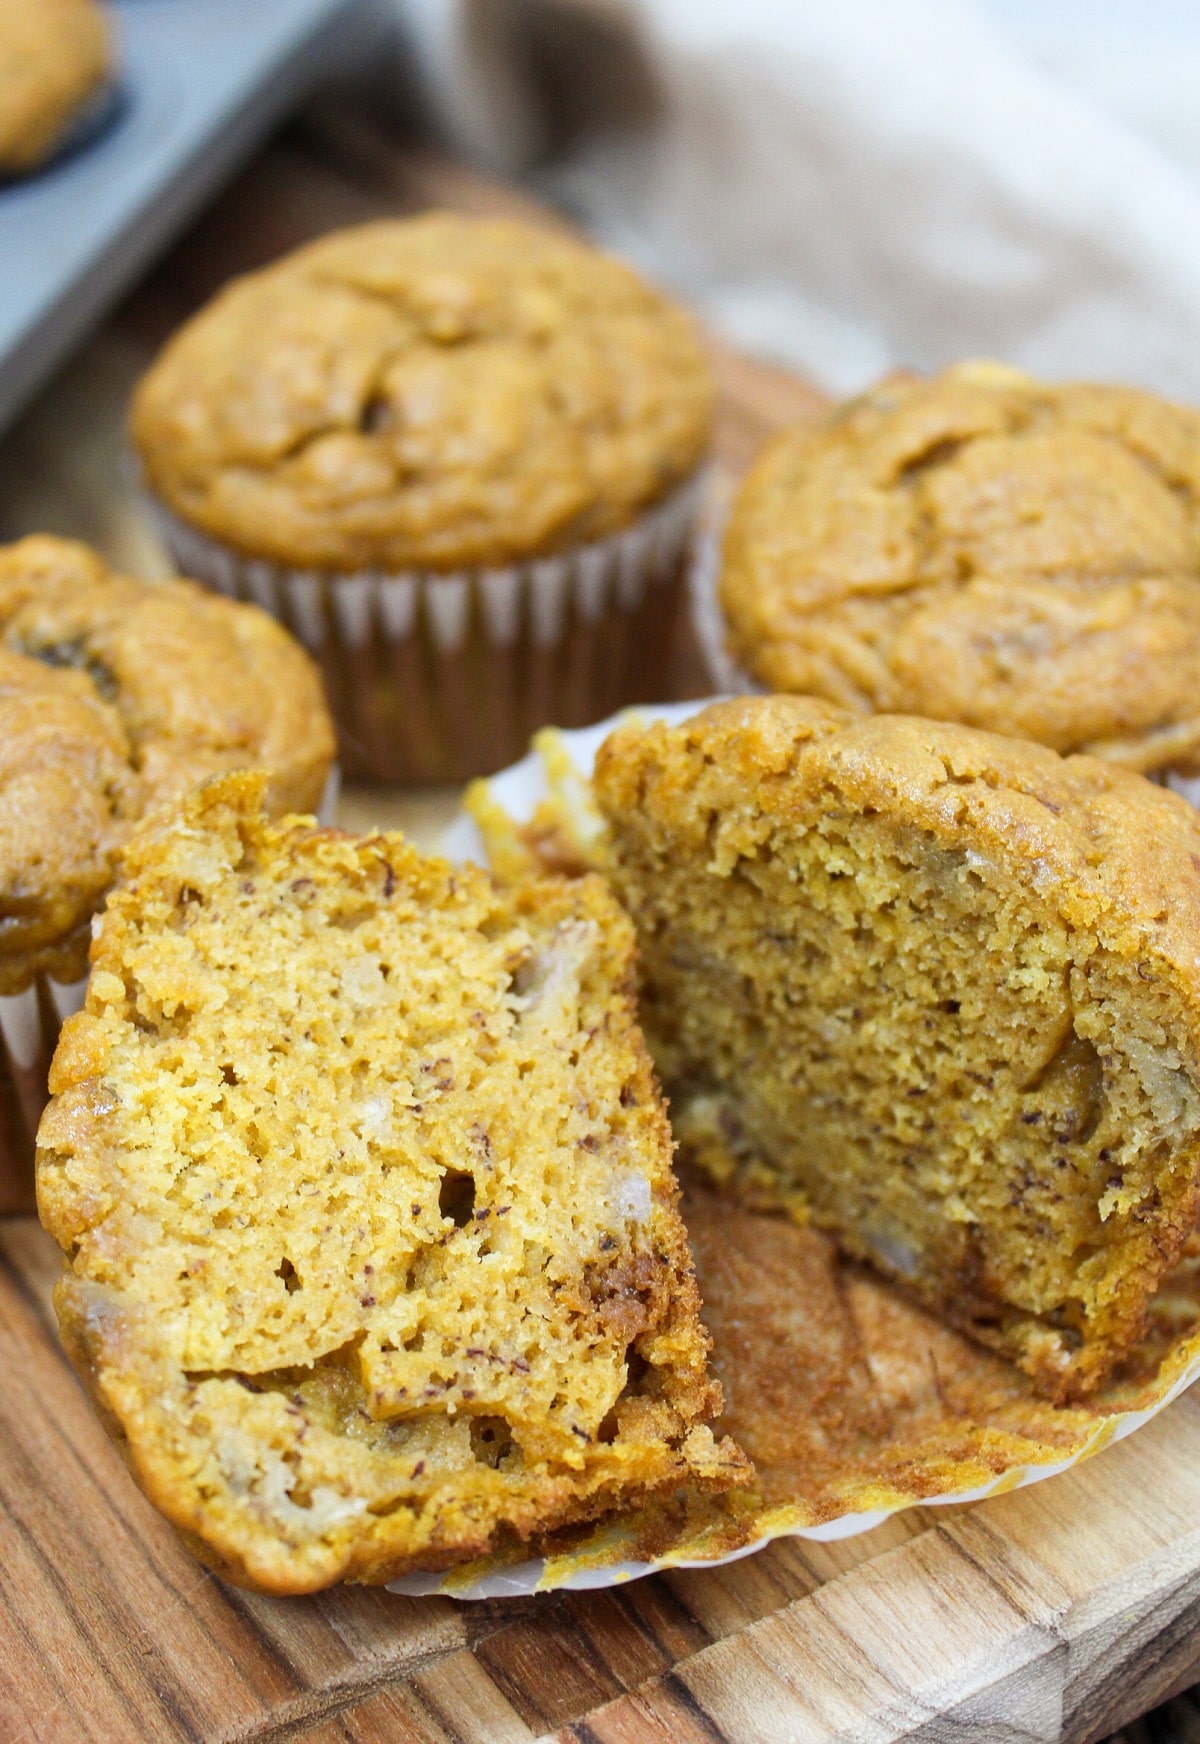 baked muffins on a cutting board with wrappers. The muffin is unwrapped and cut in half.